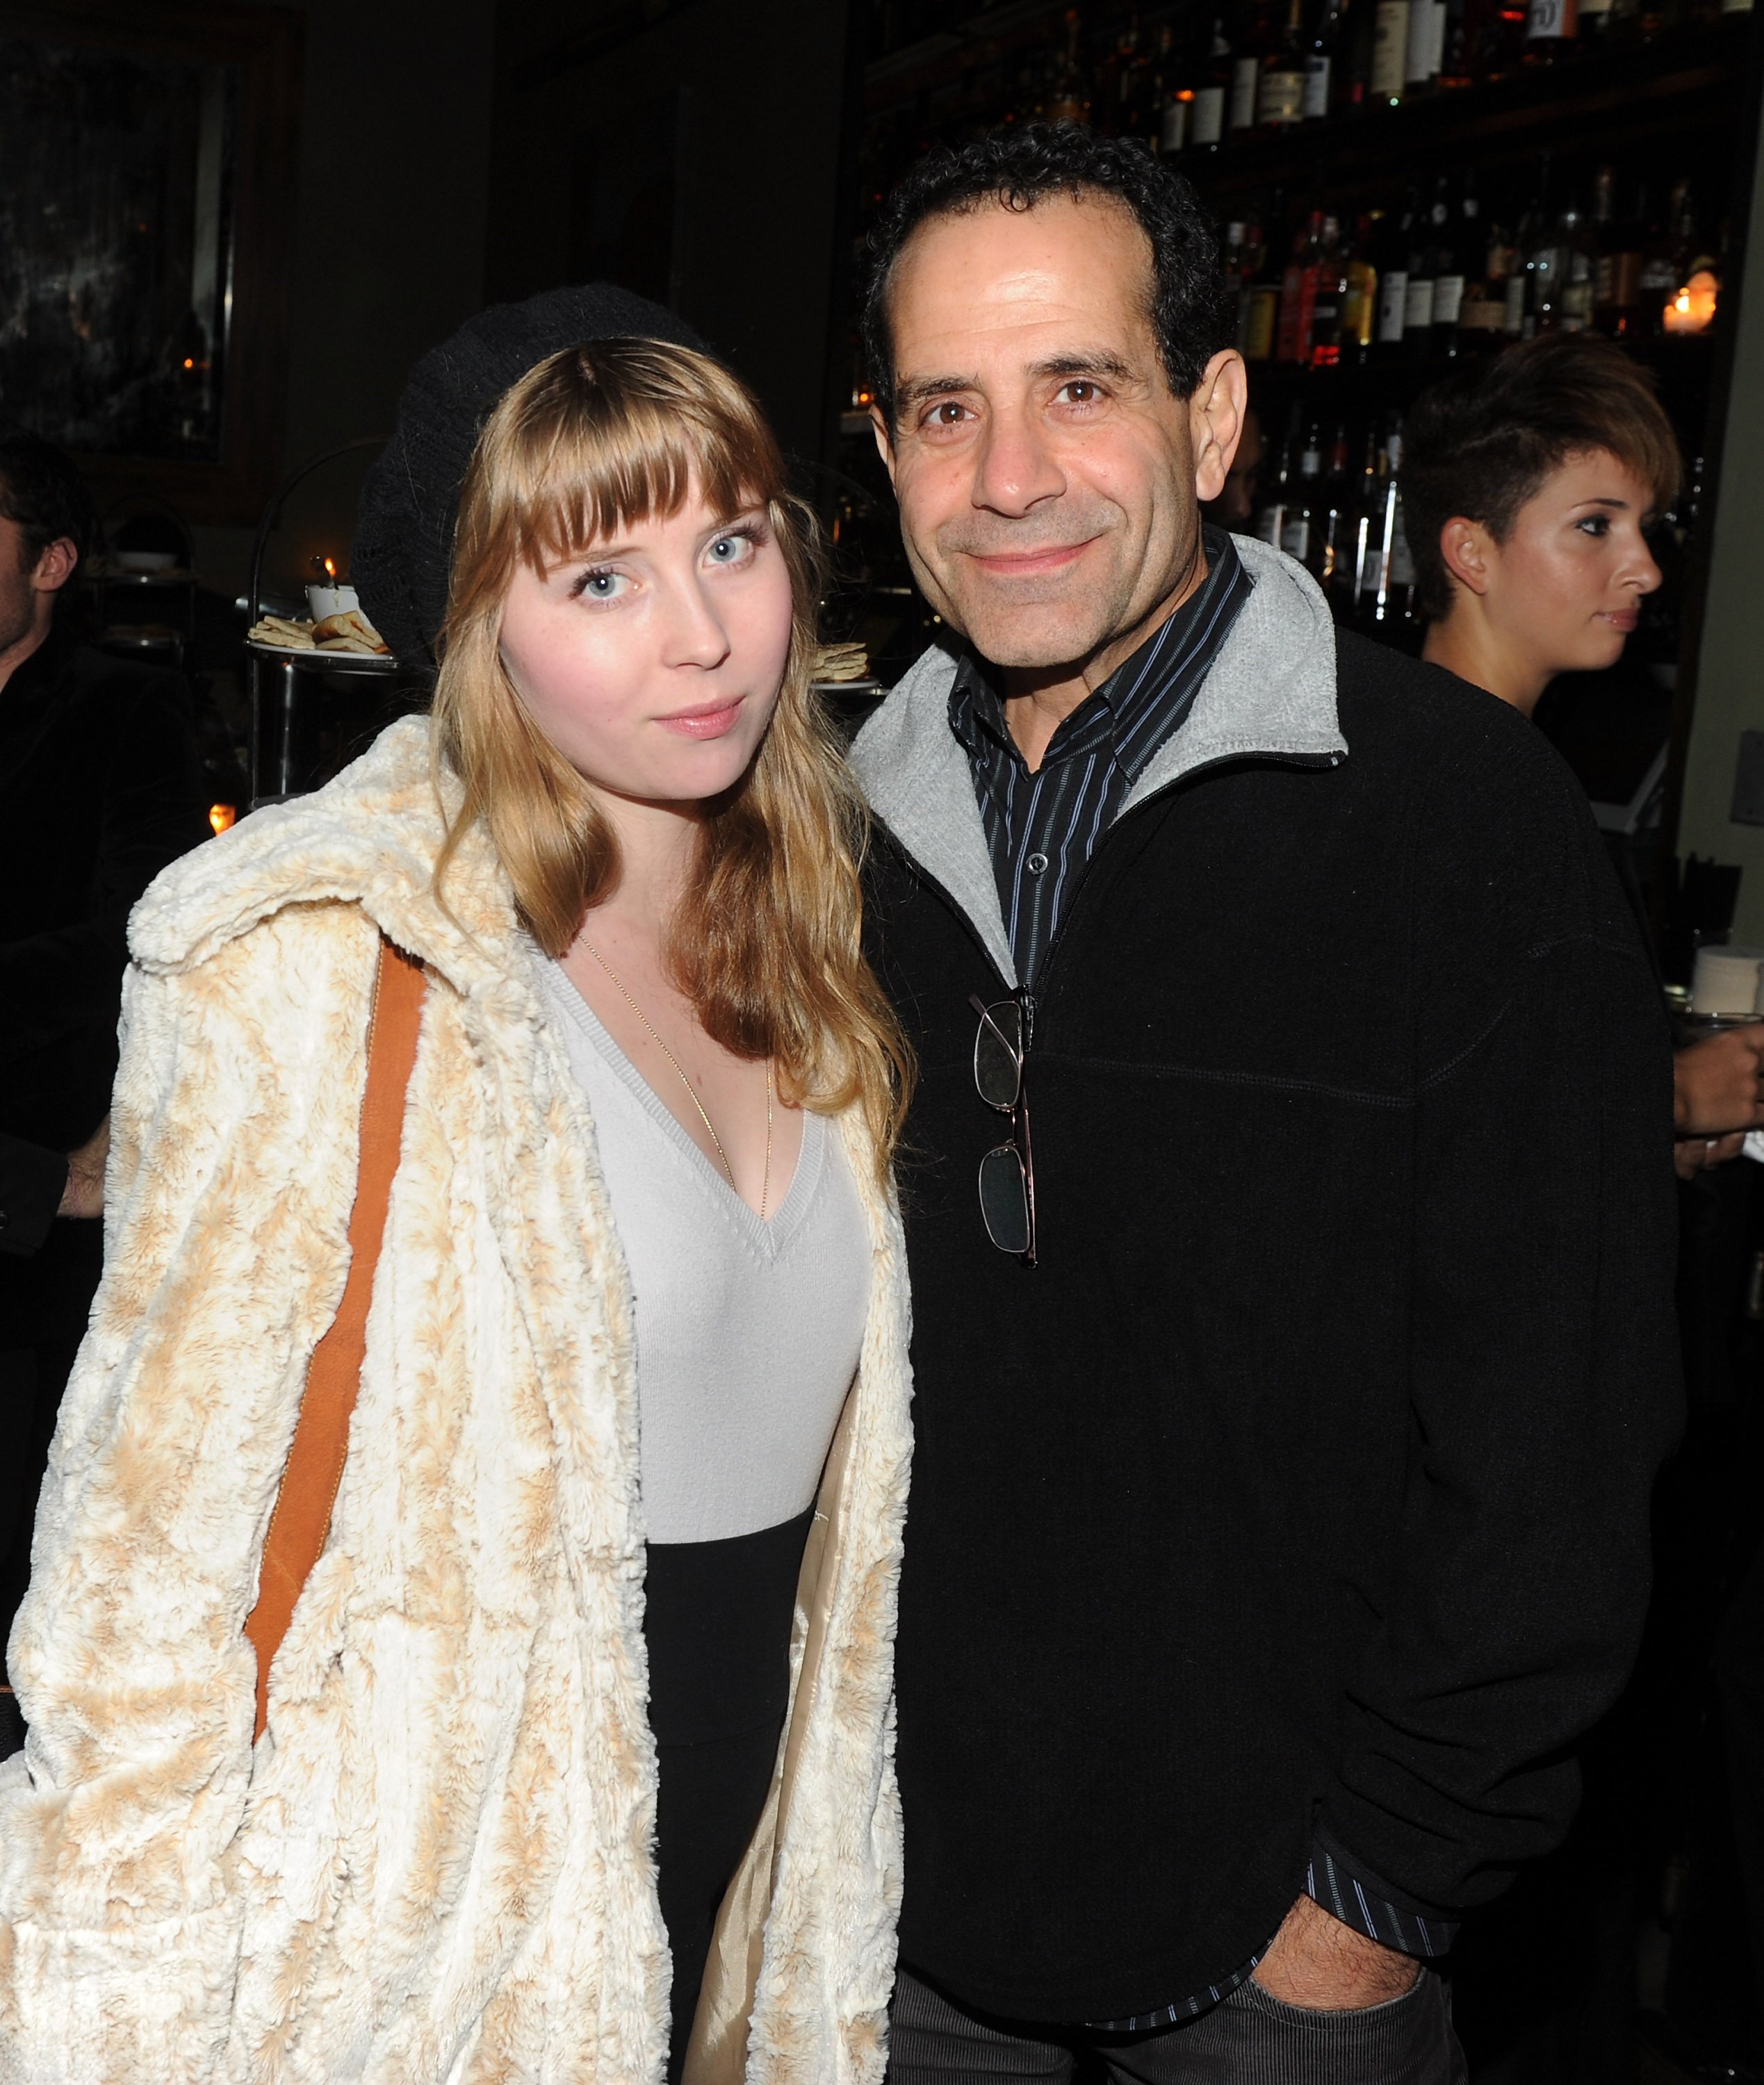 Josie Lynn Adams and father actor Tony Shalhoub attend the after party for the Cinema Society & Sony Pictures Classics screening of "Made In Dagenham" at the Soho Grand Hotel on November 14, 2010 in New York City. | Source: Getty Images